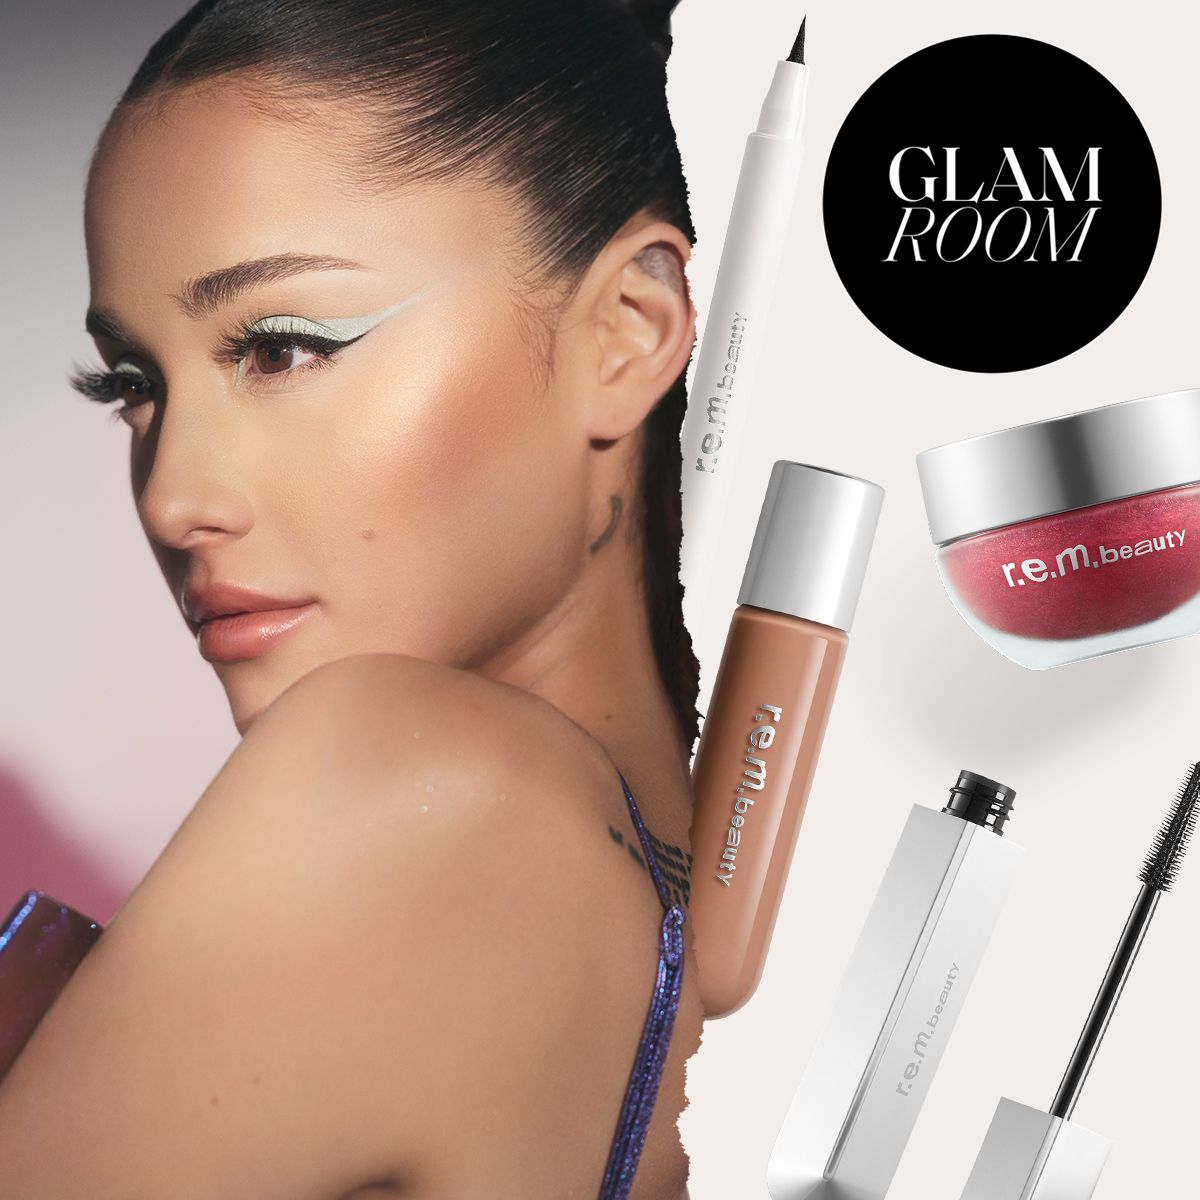 An Expert Guide to r.e.m. beauty By Ariana